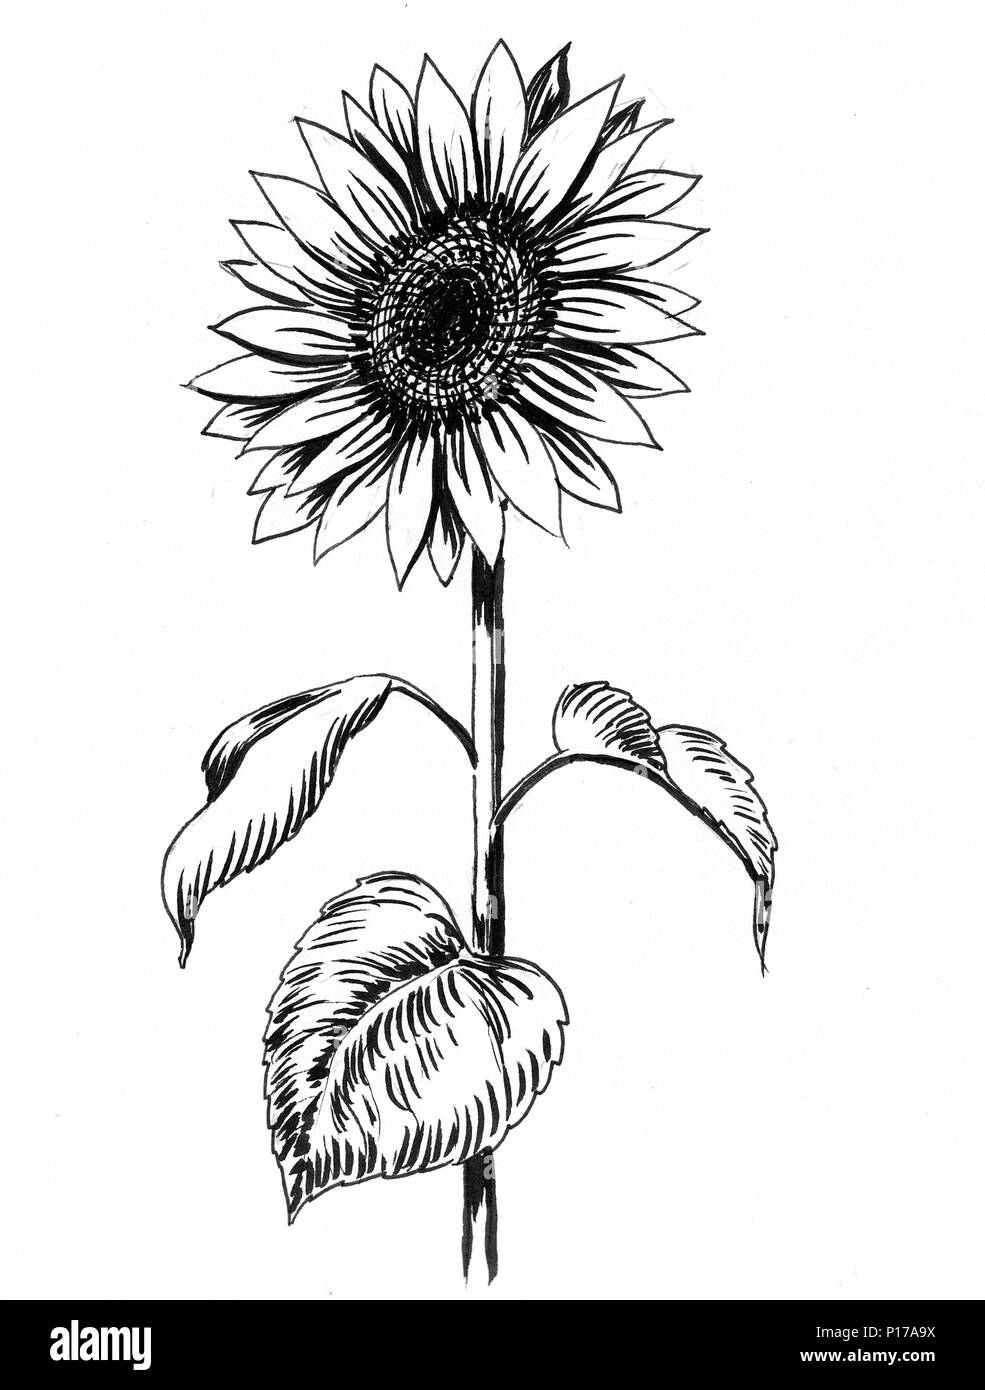 Sunflower Ink Black And White Drawing Stock Photo 207300854 Alamy